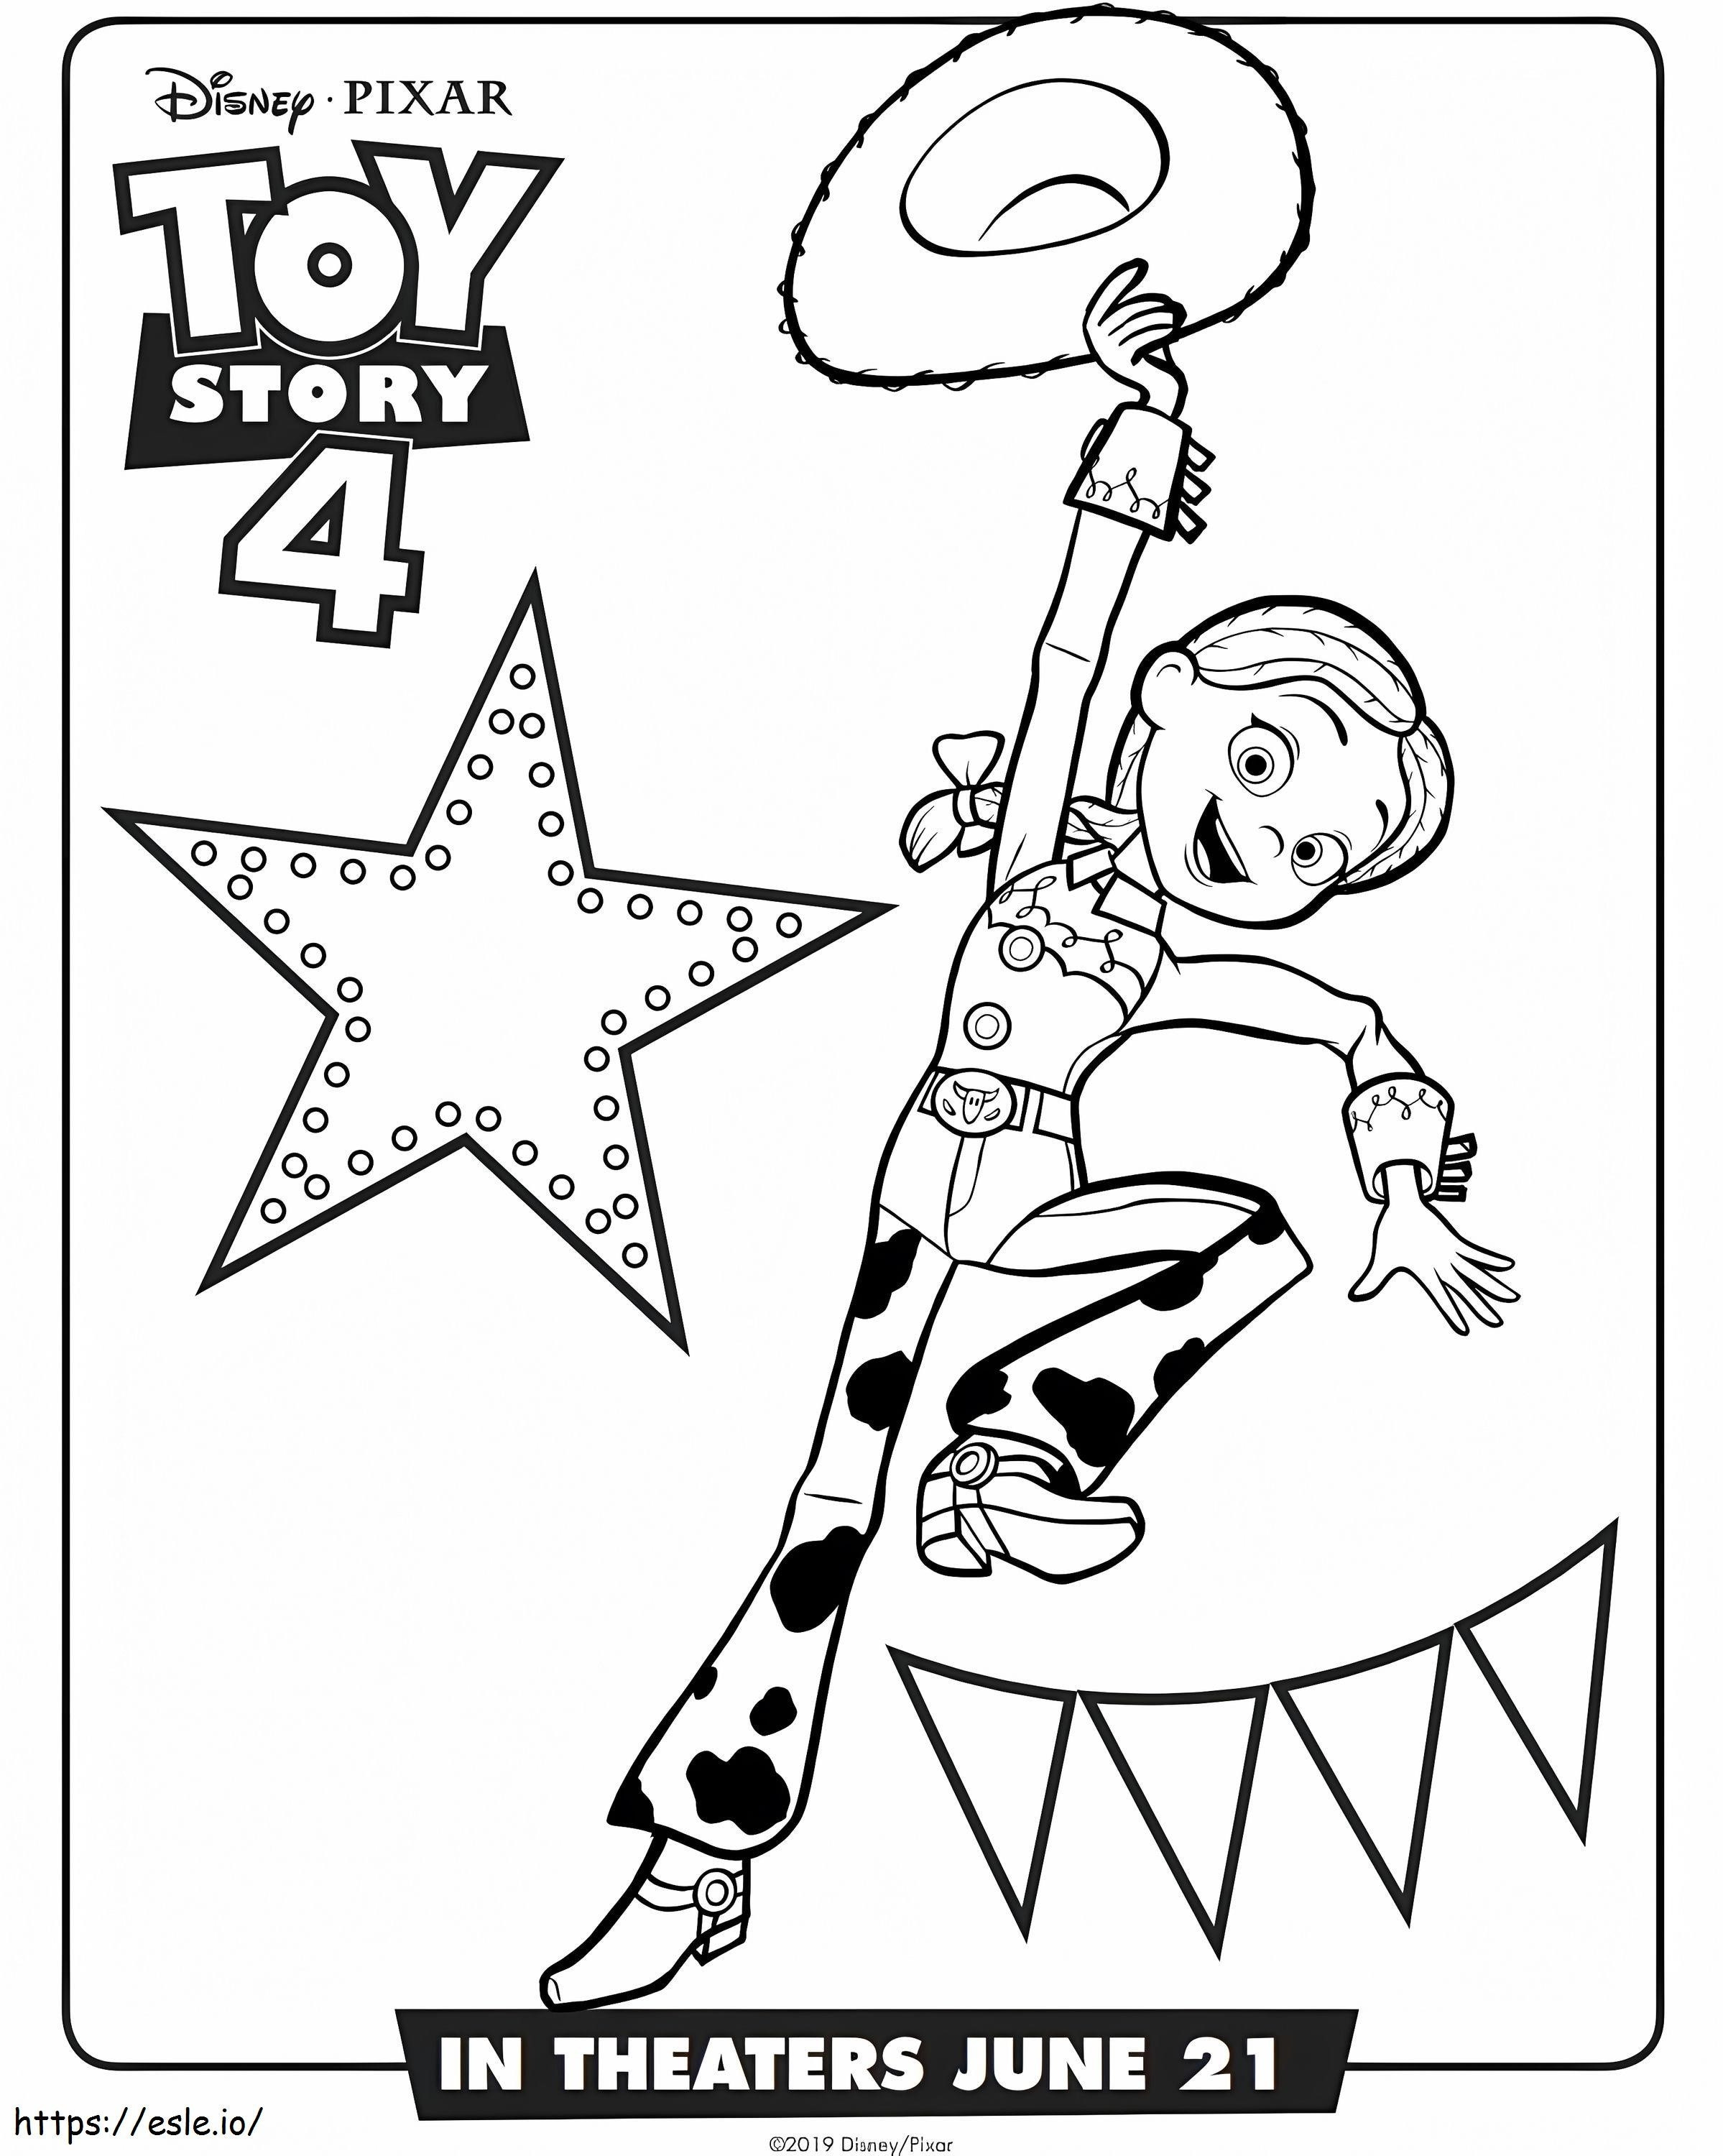 1559981807 Jessie Toy Story 4 A4 coloring page